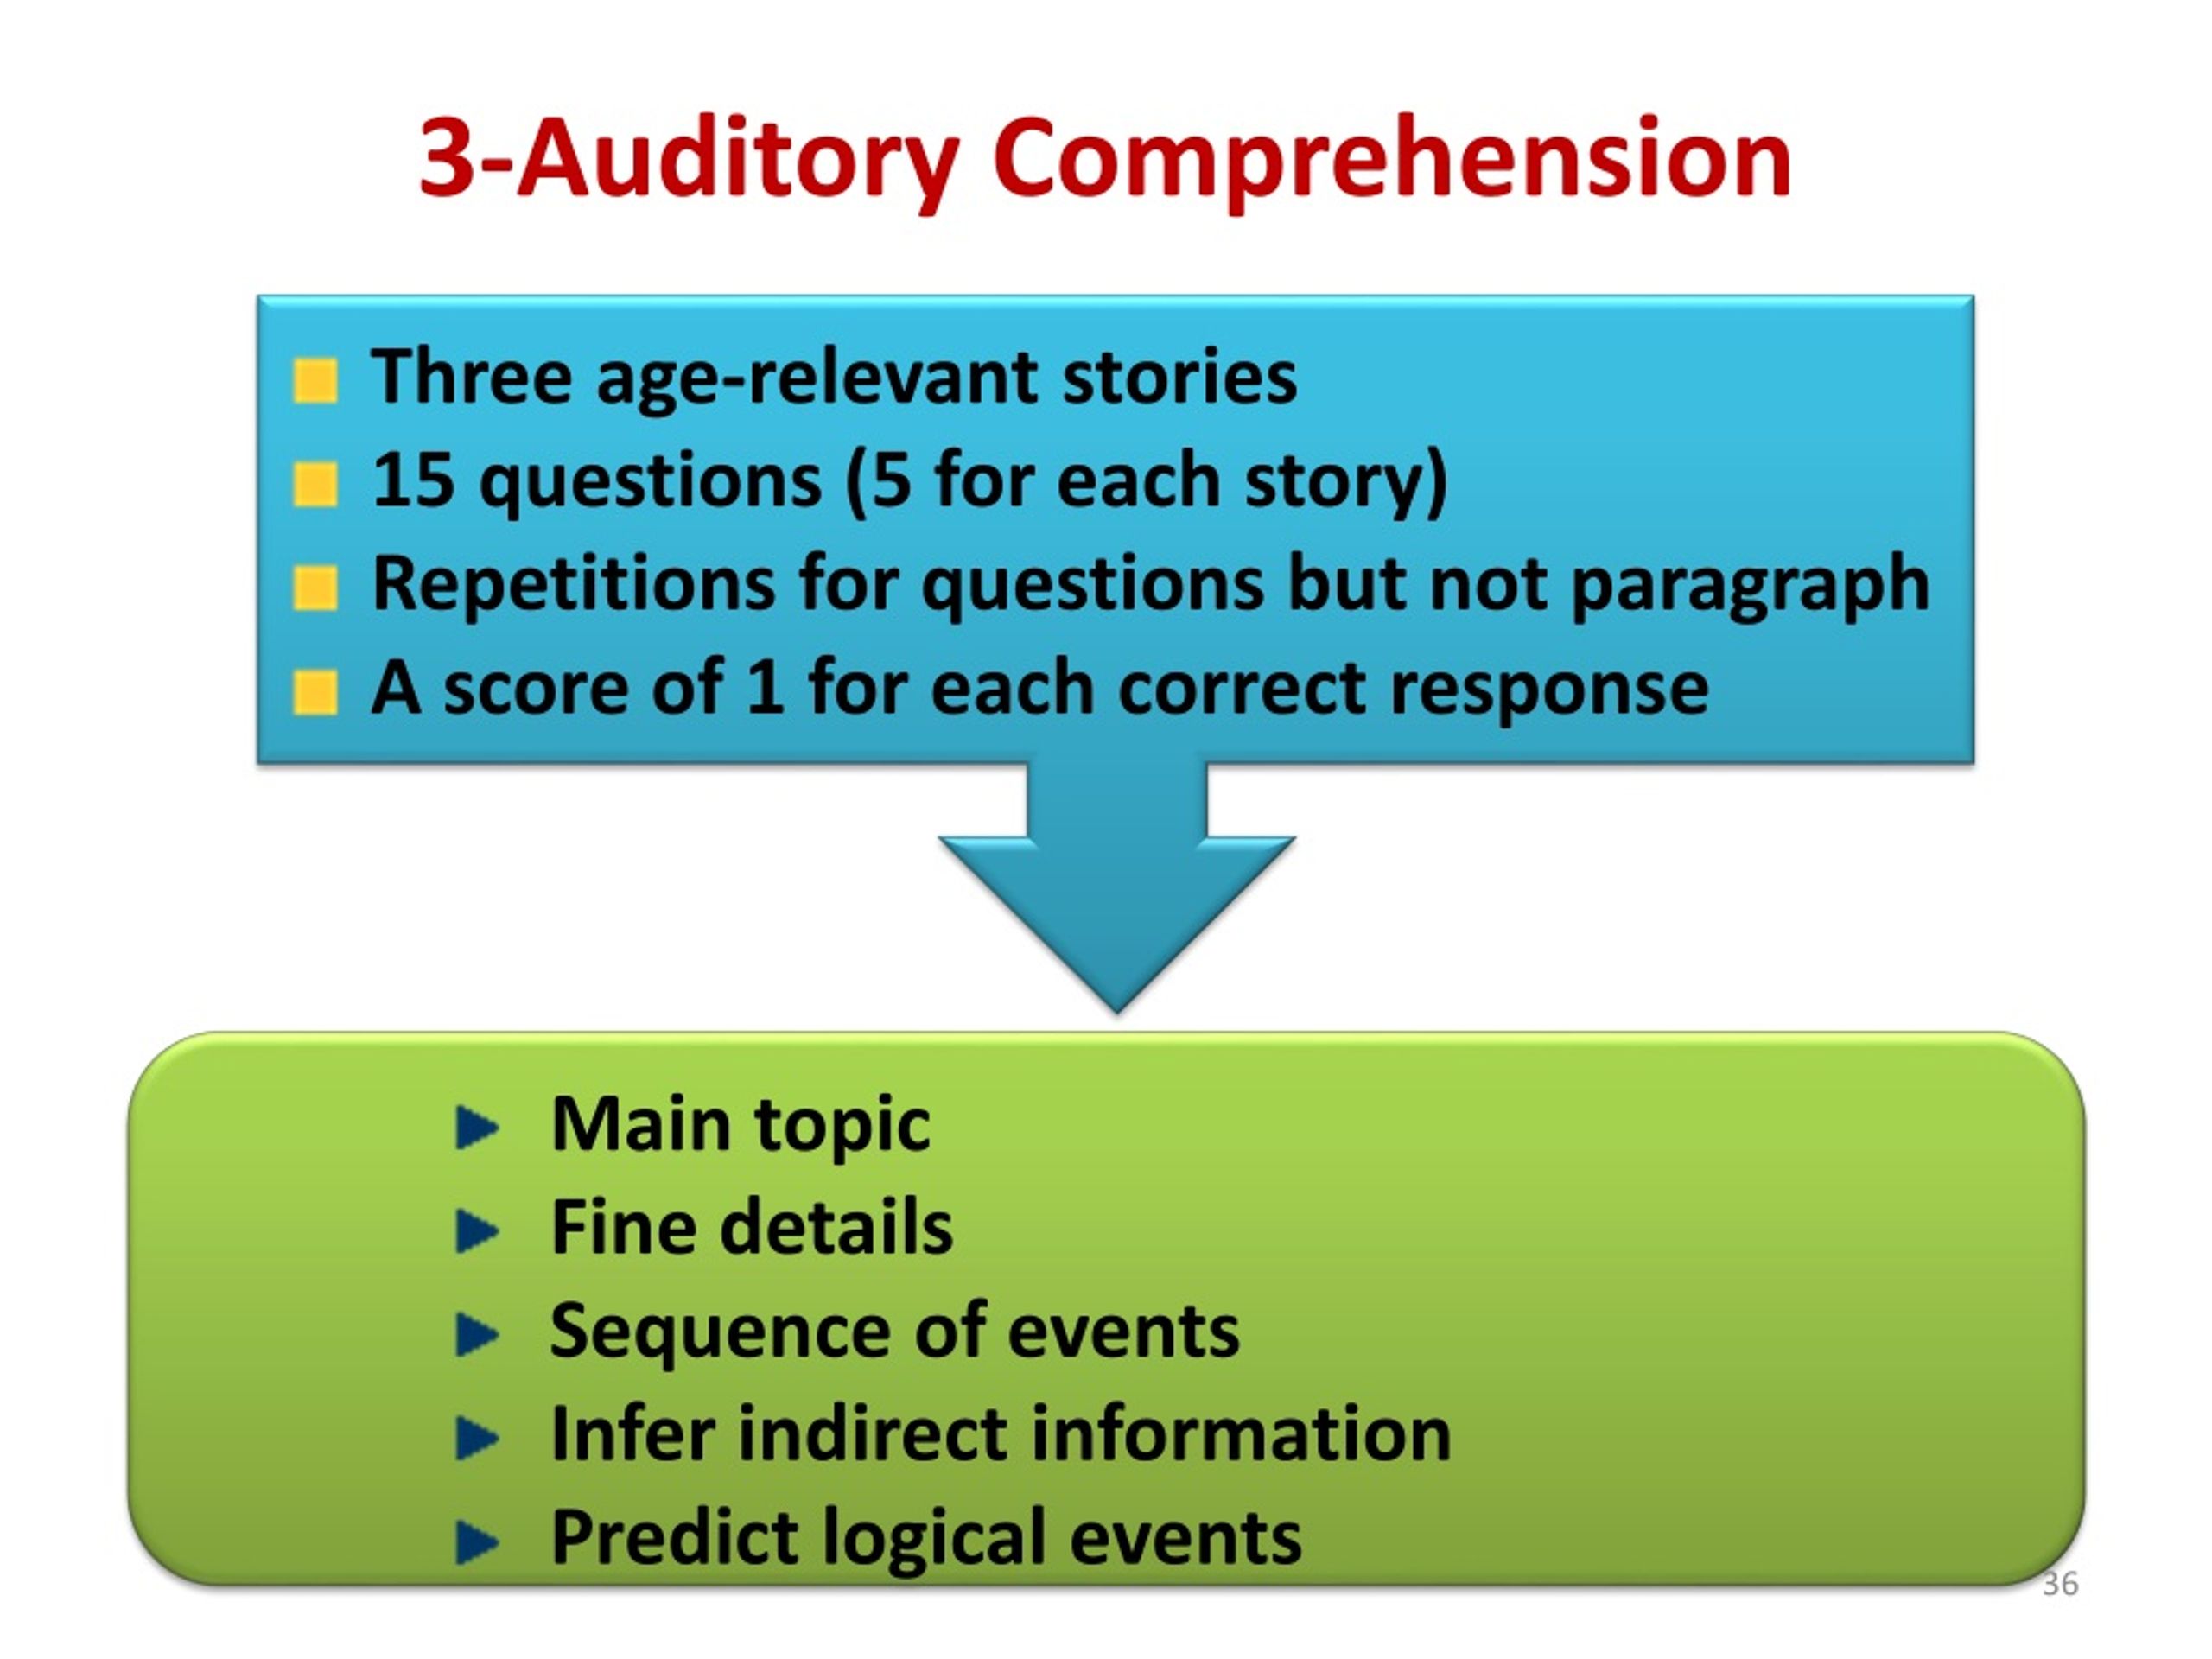 auditory comprehension treatment